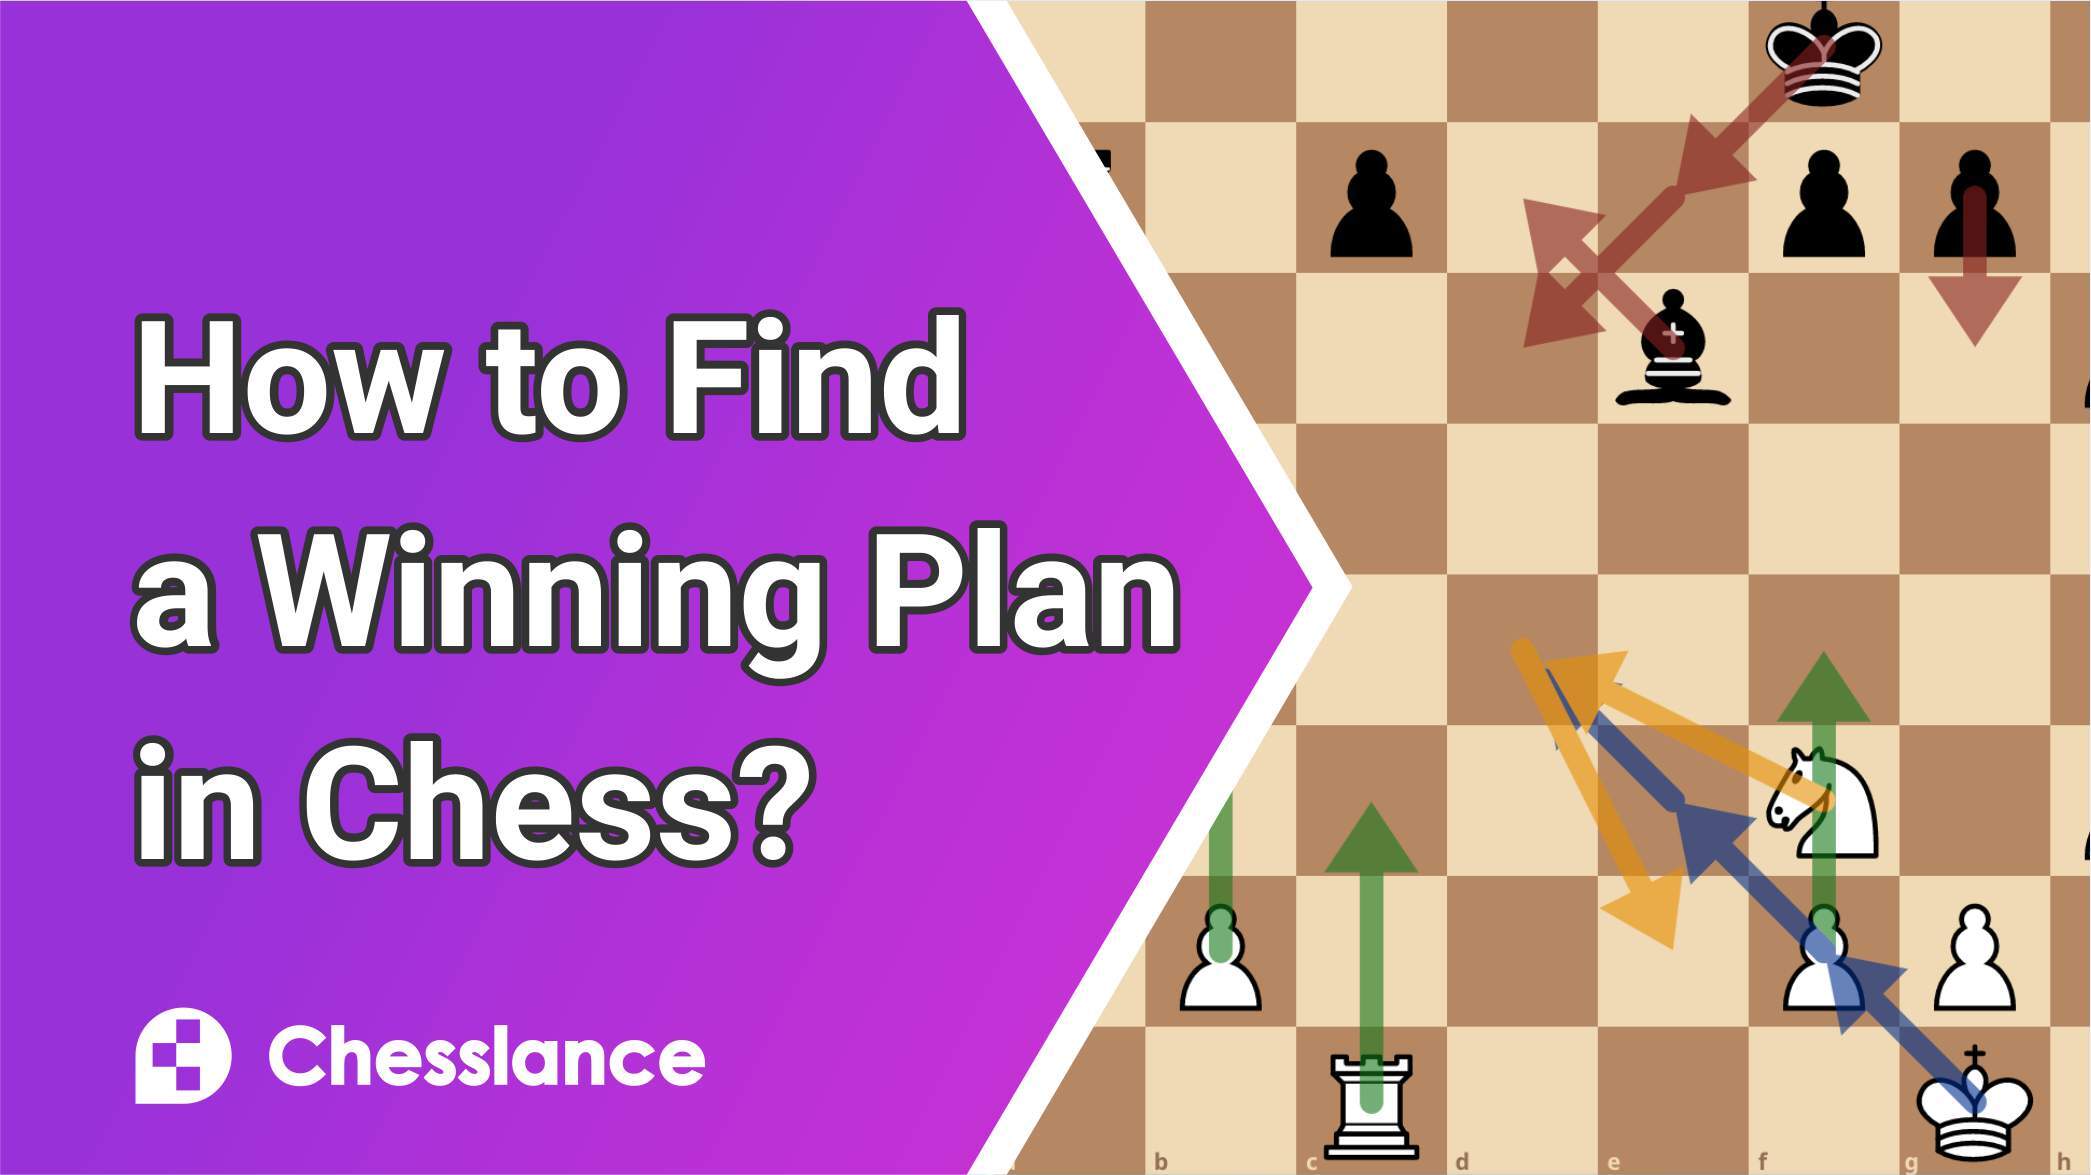 How to find a winning plan in Chess?